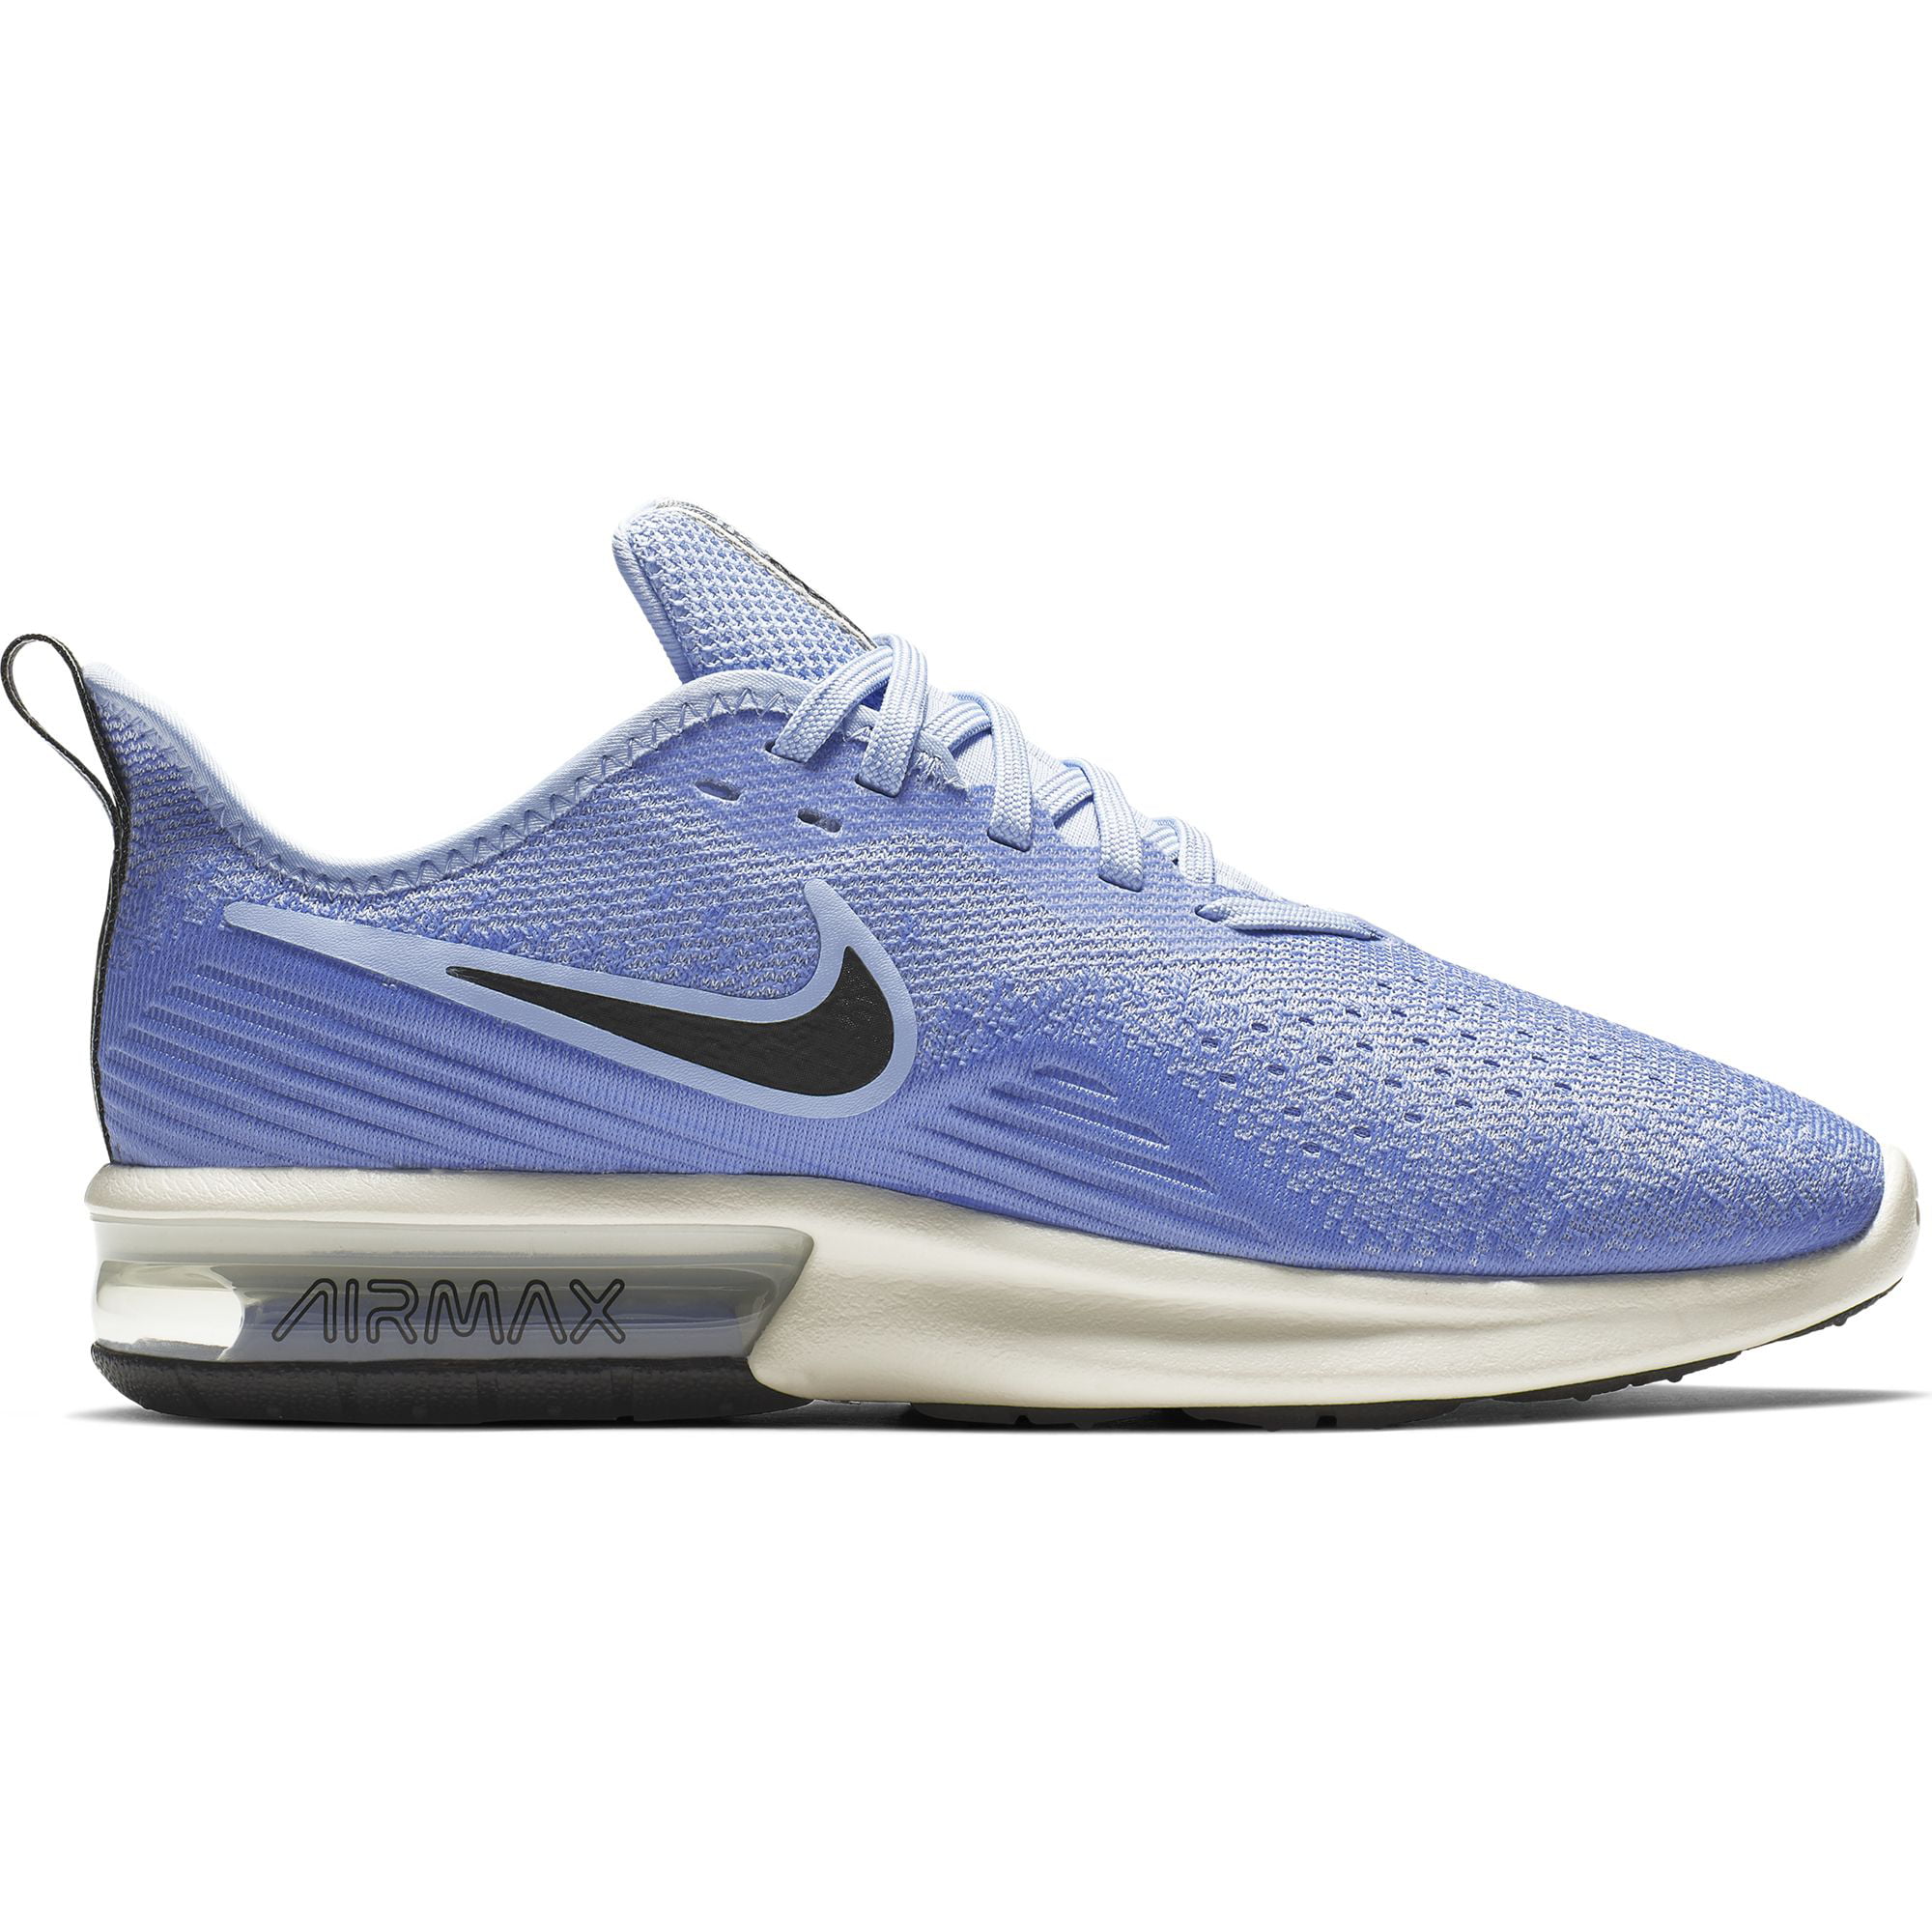 nike air max sequent women's running shoe